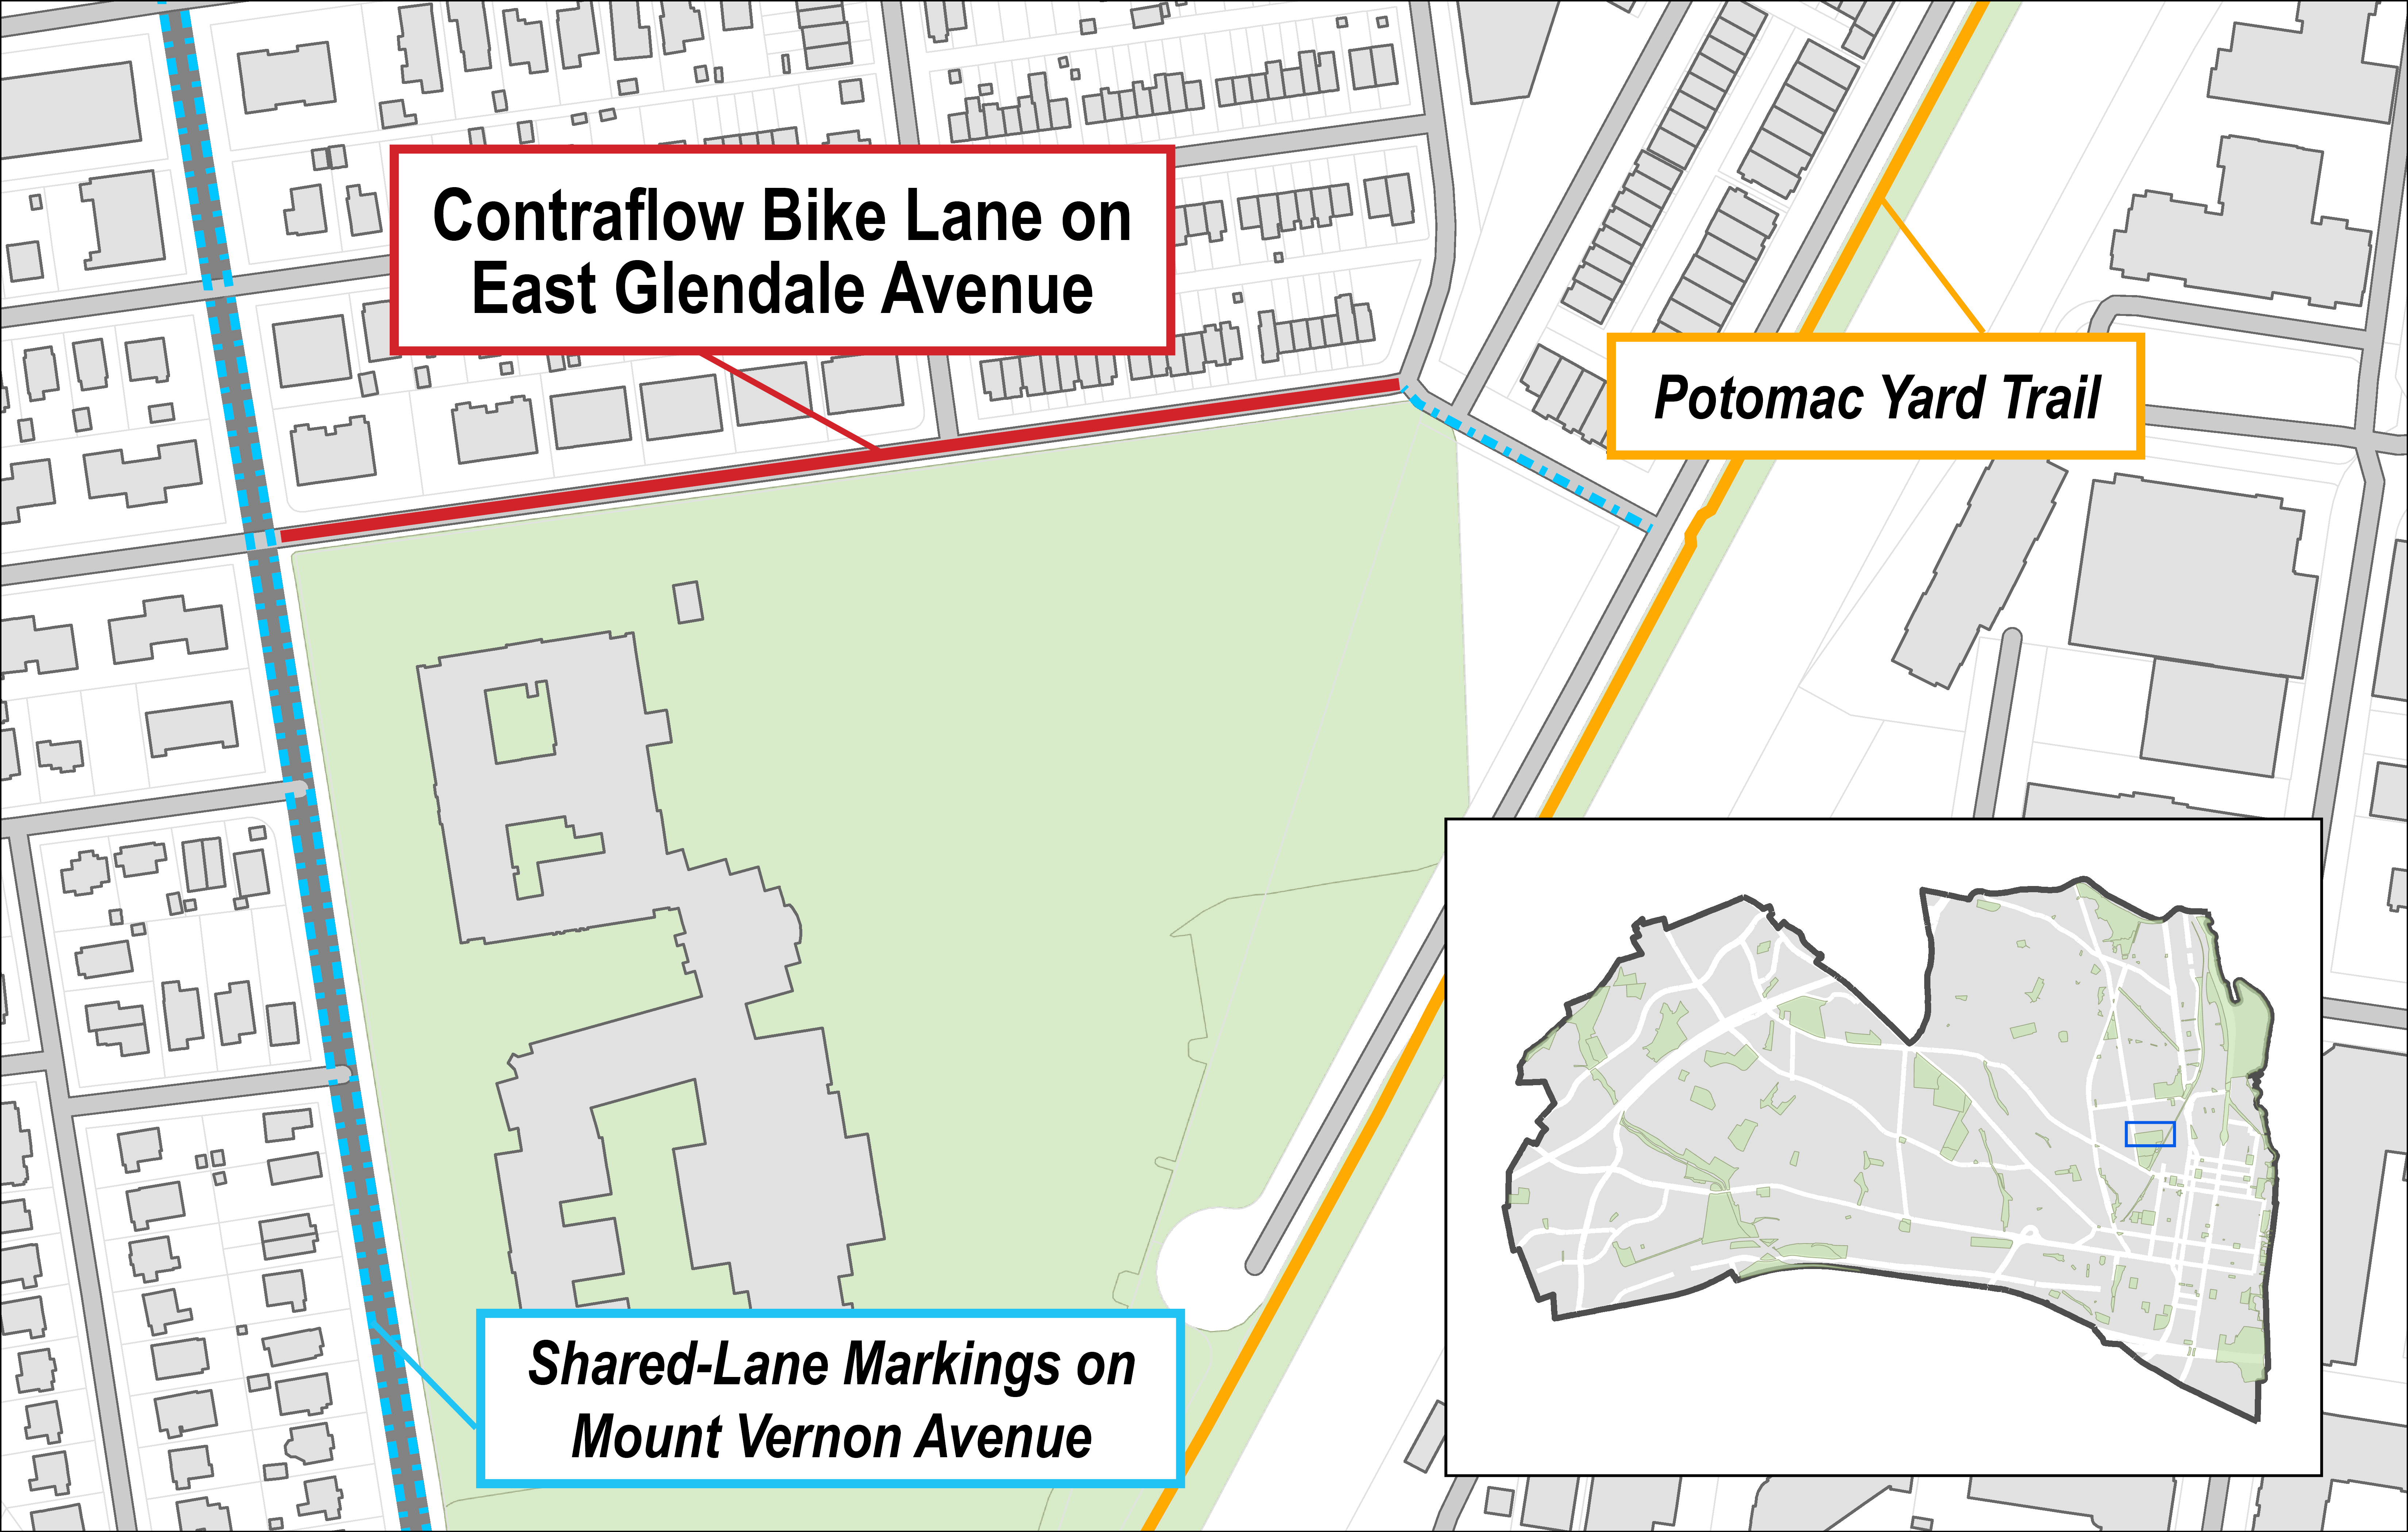 This map shows the location of the East Glendale Avenue contraflow bike lane and how it connects to existing bicycle infrastructure.